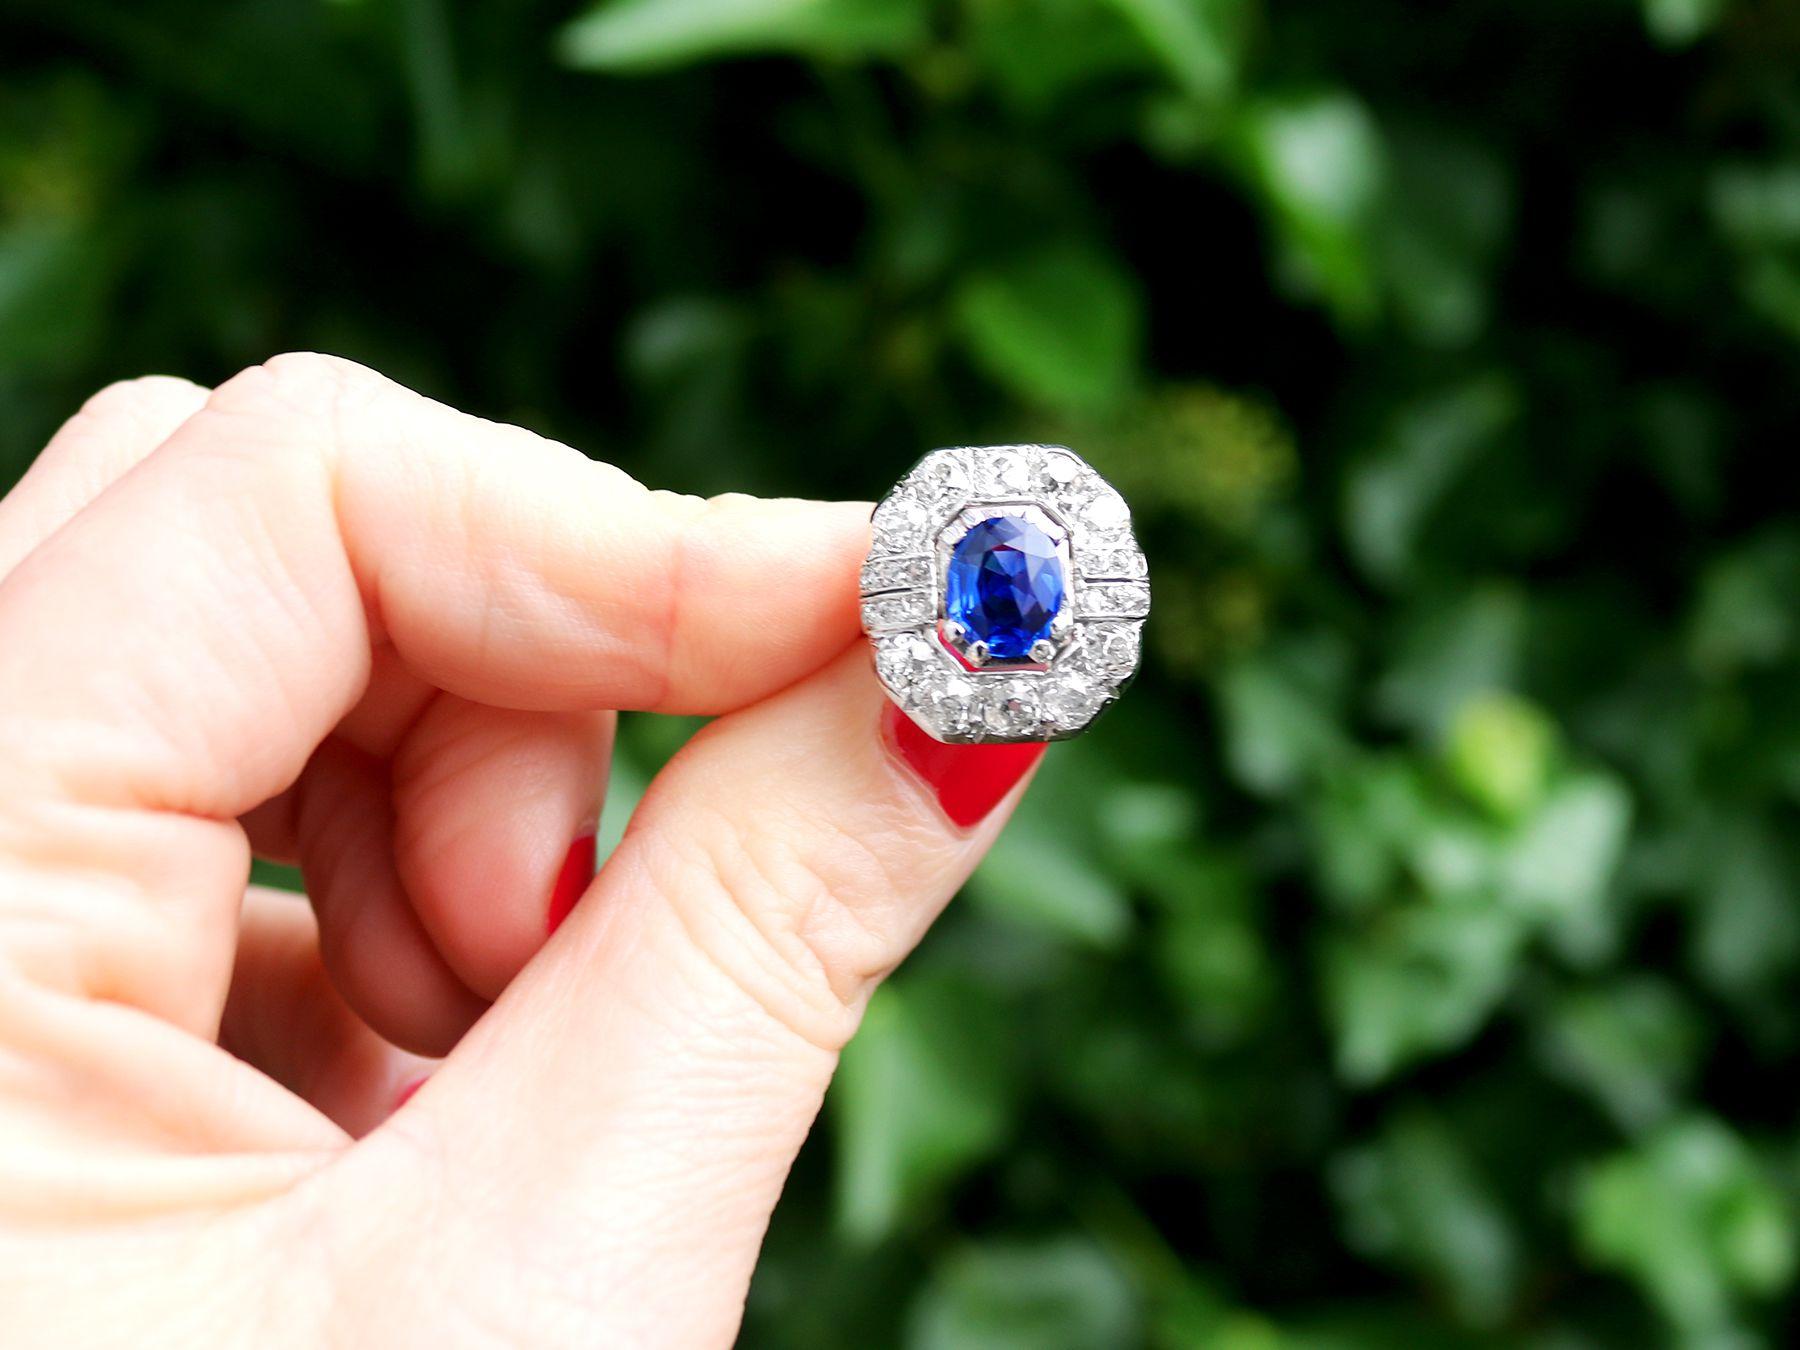 A stunning and impressive antique French 2.20 carat Madagascar sapphire and 2.16 carat diamond, 18 karat white gold cluster ring; part of our diverse gemstone jewelry collections.

This stunning, fine and impressive antique sapphire cluster ring has